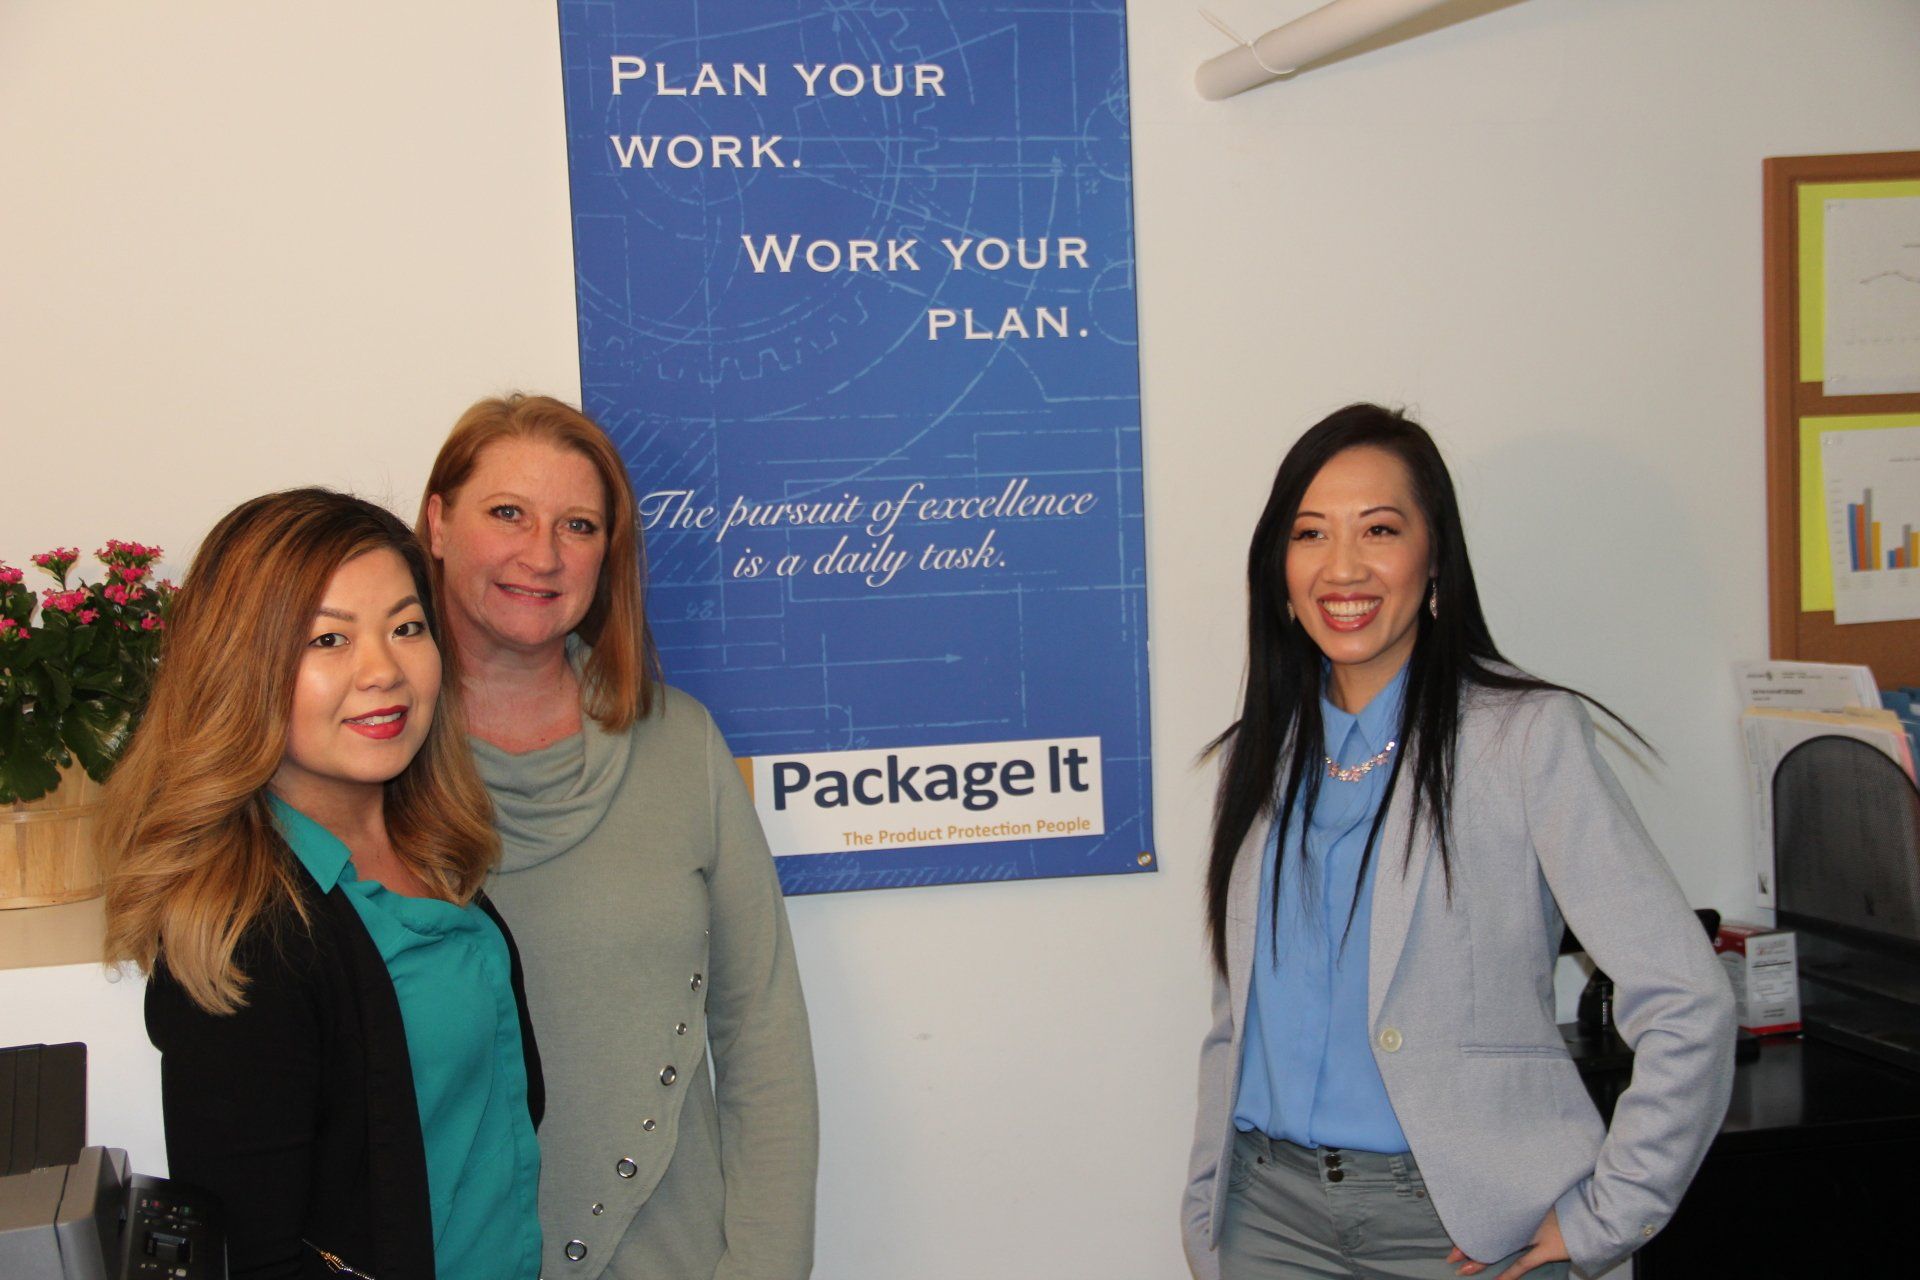 Three women are standing in front of a poster that says `` plan your work work your plan ''.